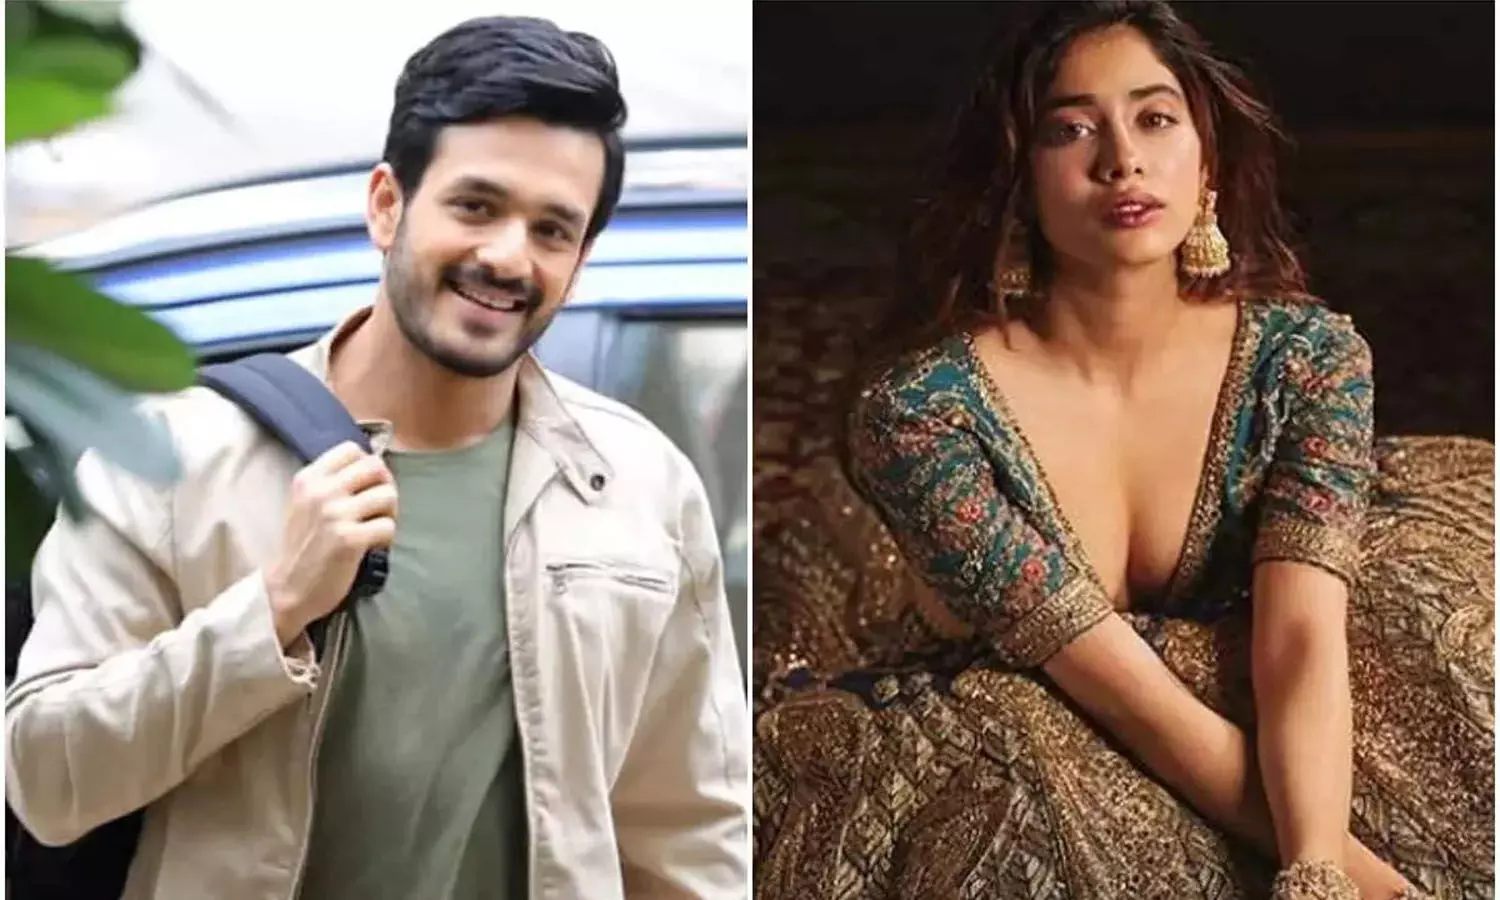 After Agent flop show, Akhil fans pin hopes on his next with Jahnvi Kapoor